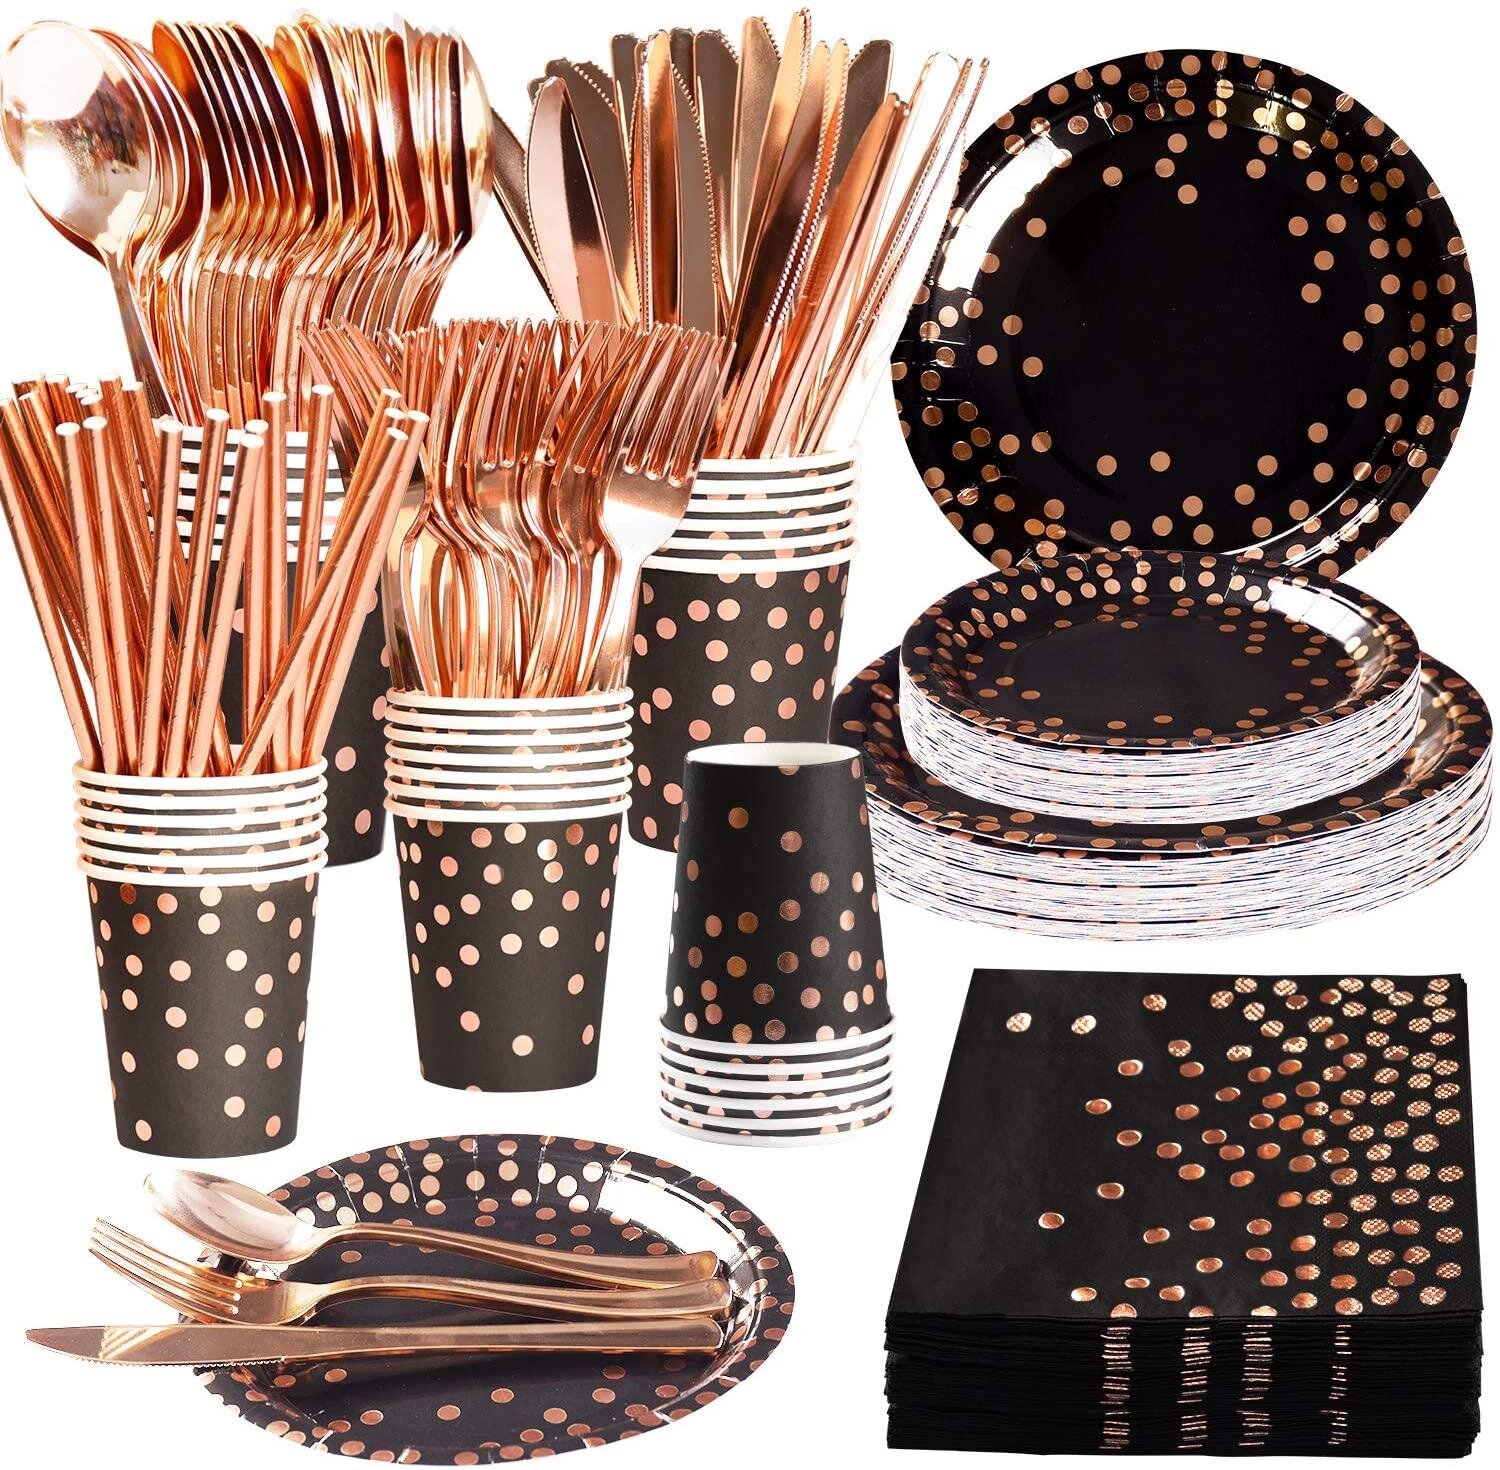 25 Spoons 50 Forks 200 Piece Disposable Dinnerware Set for Birthdays 25 Guest Towels Black and White 25 Knives 25 Dinner Plates 25 Dessert Plates Parties and Holidays 25 Cups 